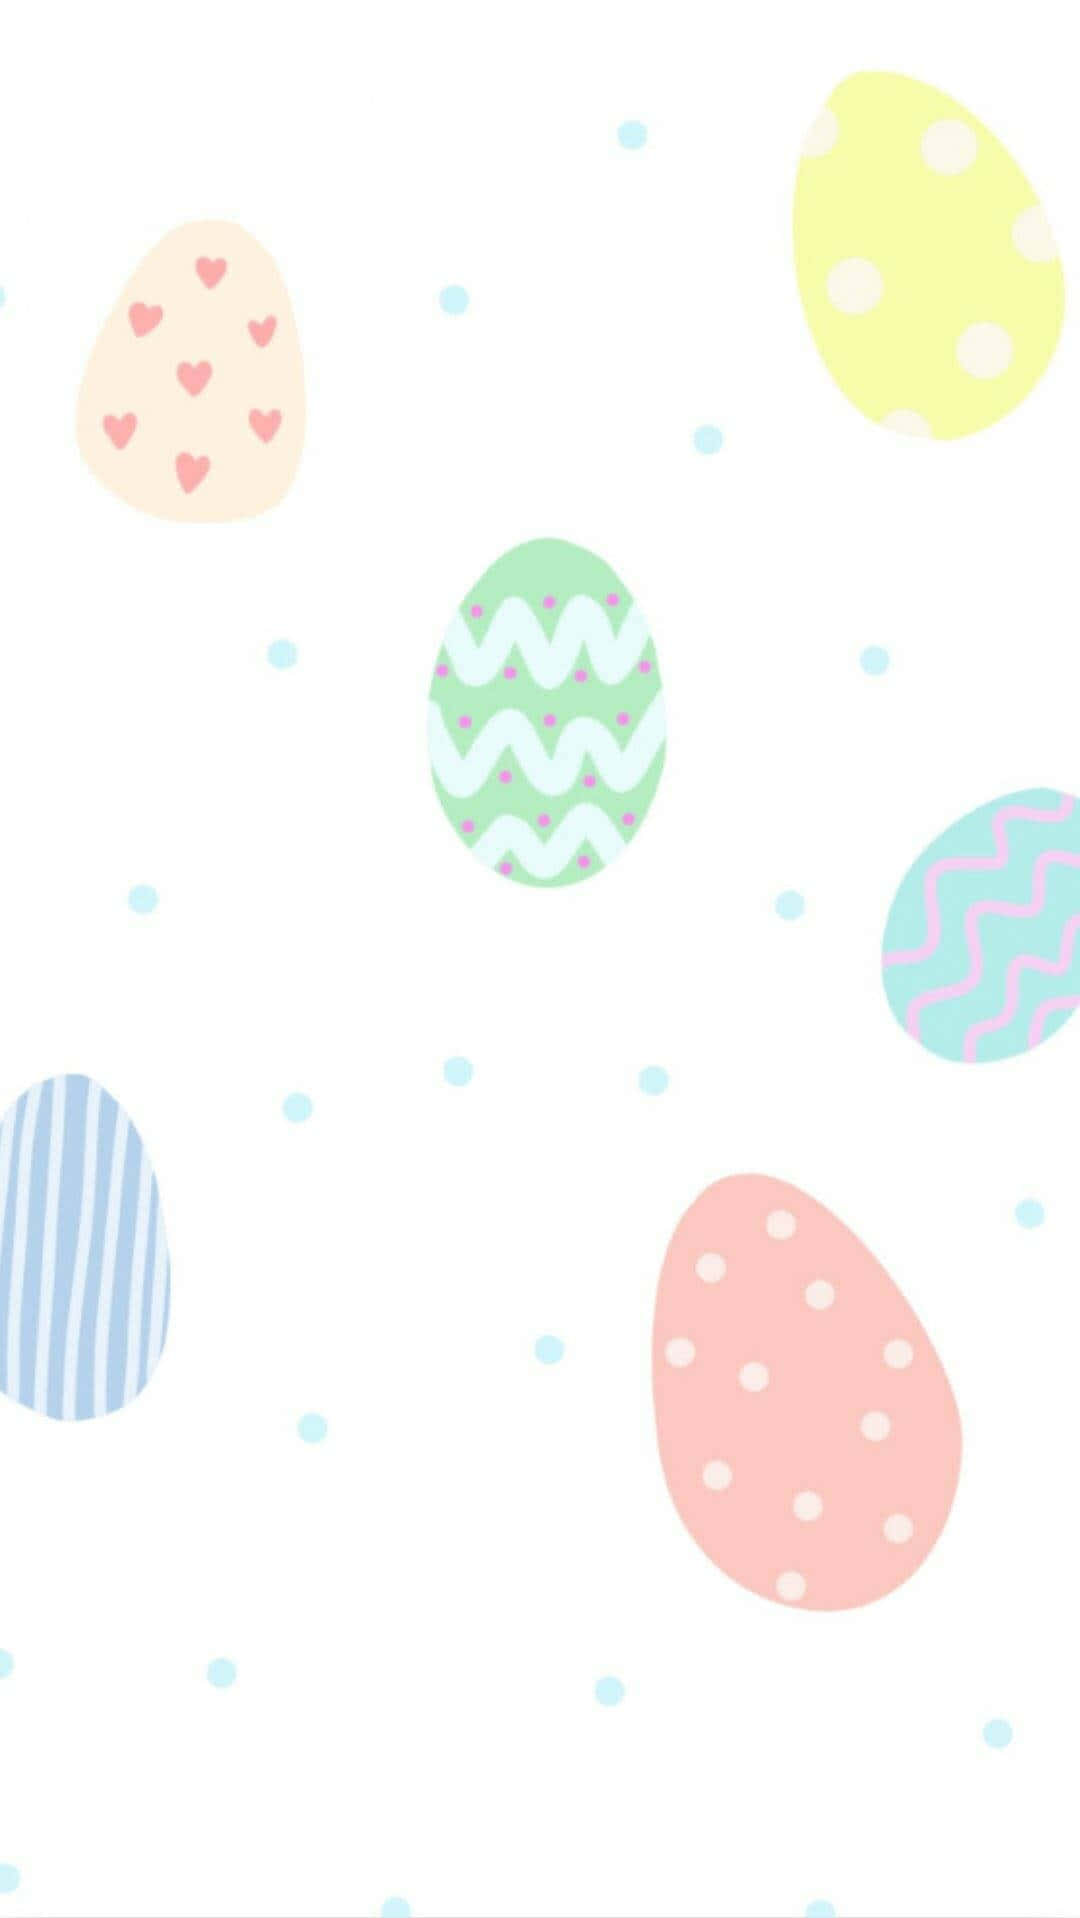 Celebrate Easter with this Cheerful Cute Easter Iphone Wallpaper Wallpaper